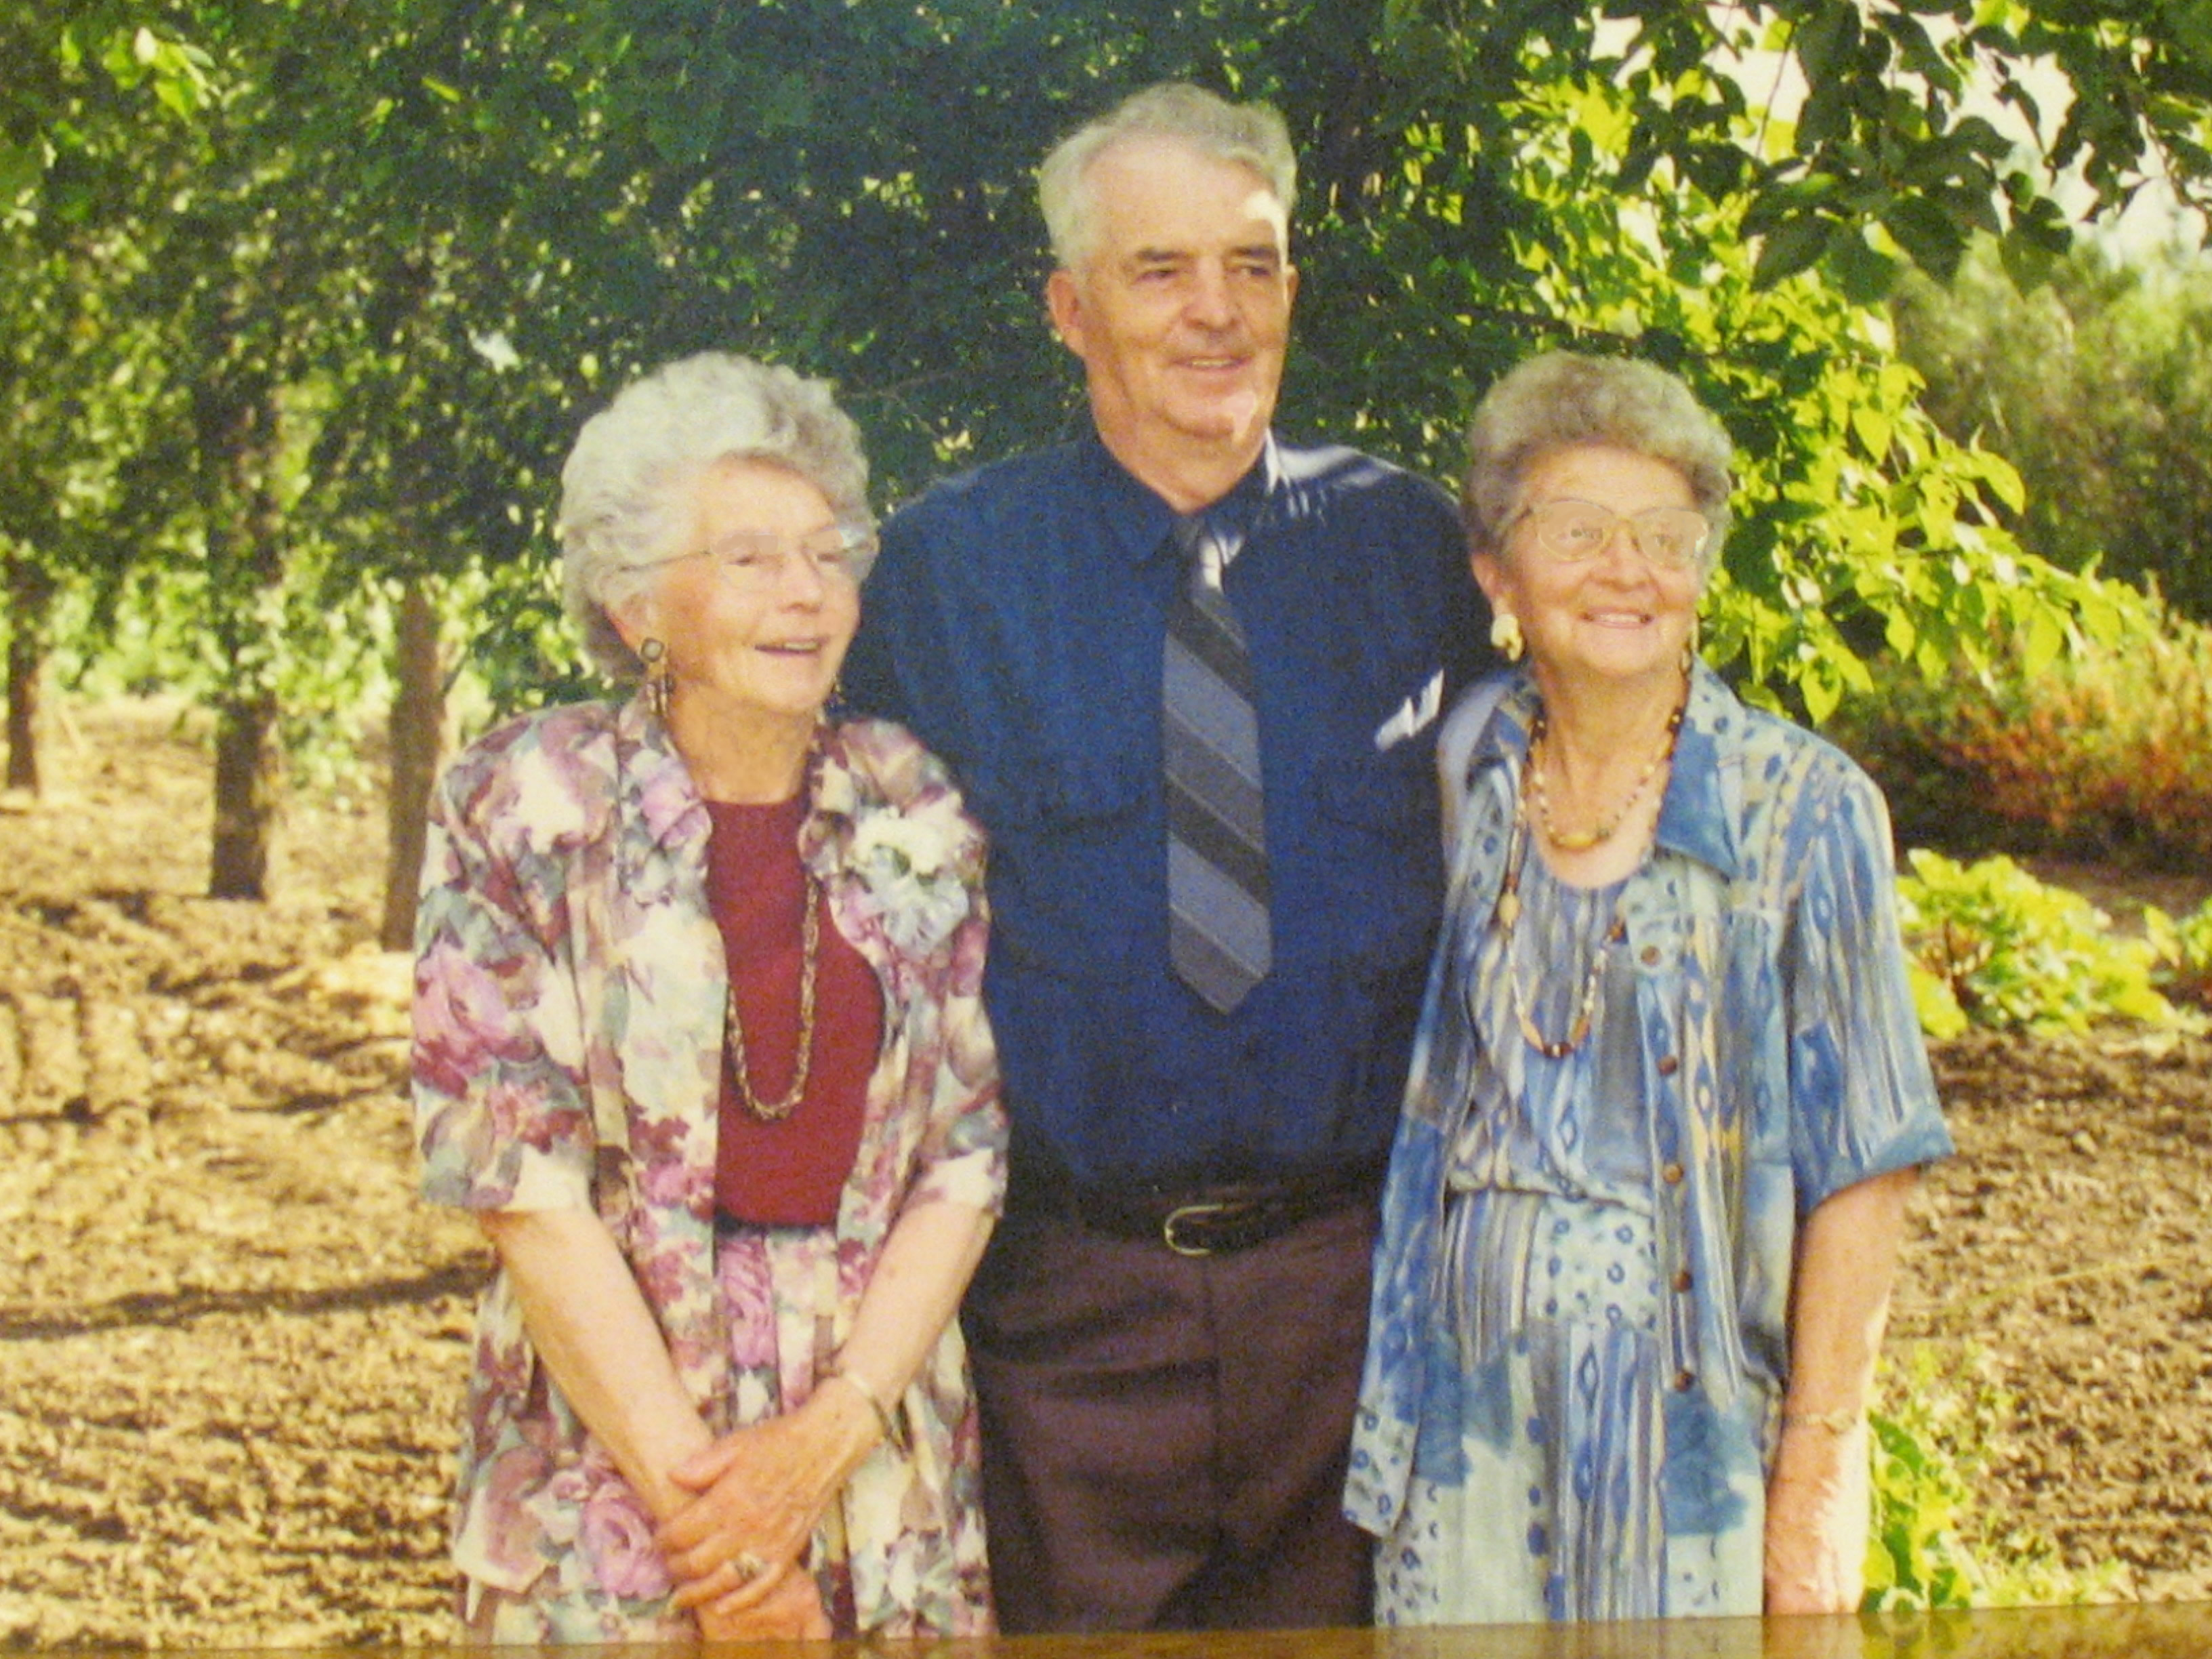 walter and sisters, Betty and Doris